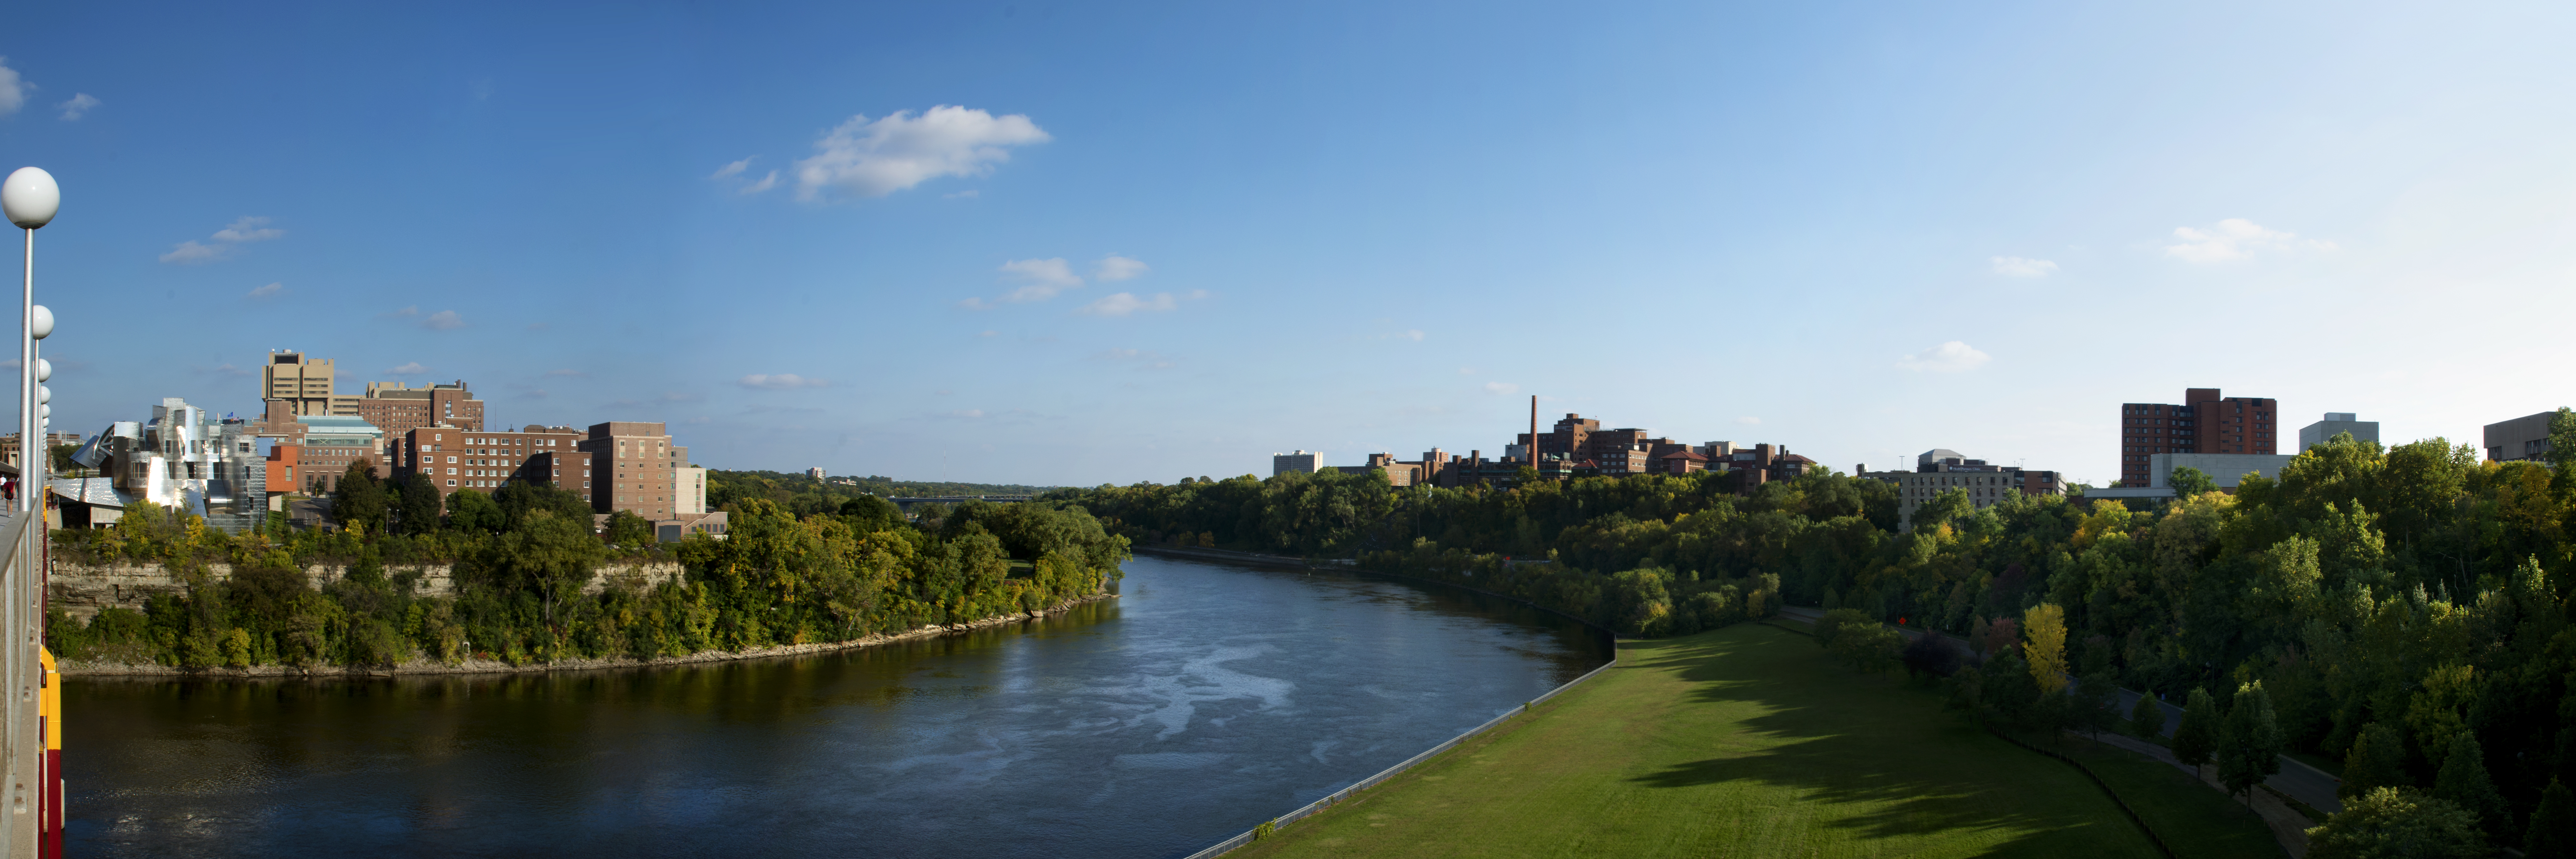 Panoramic view or Twin Cities Campus